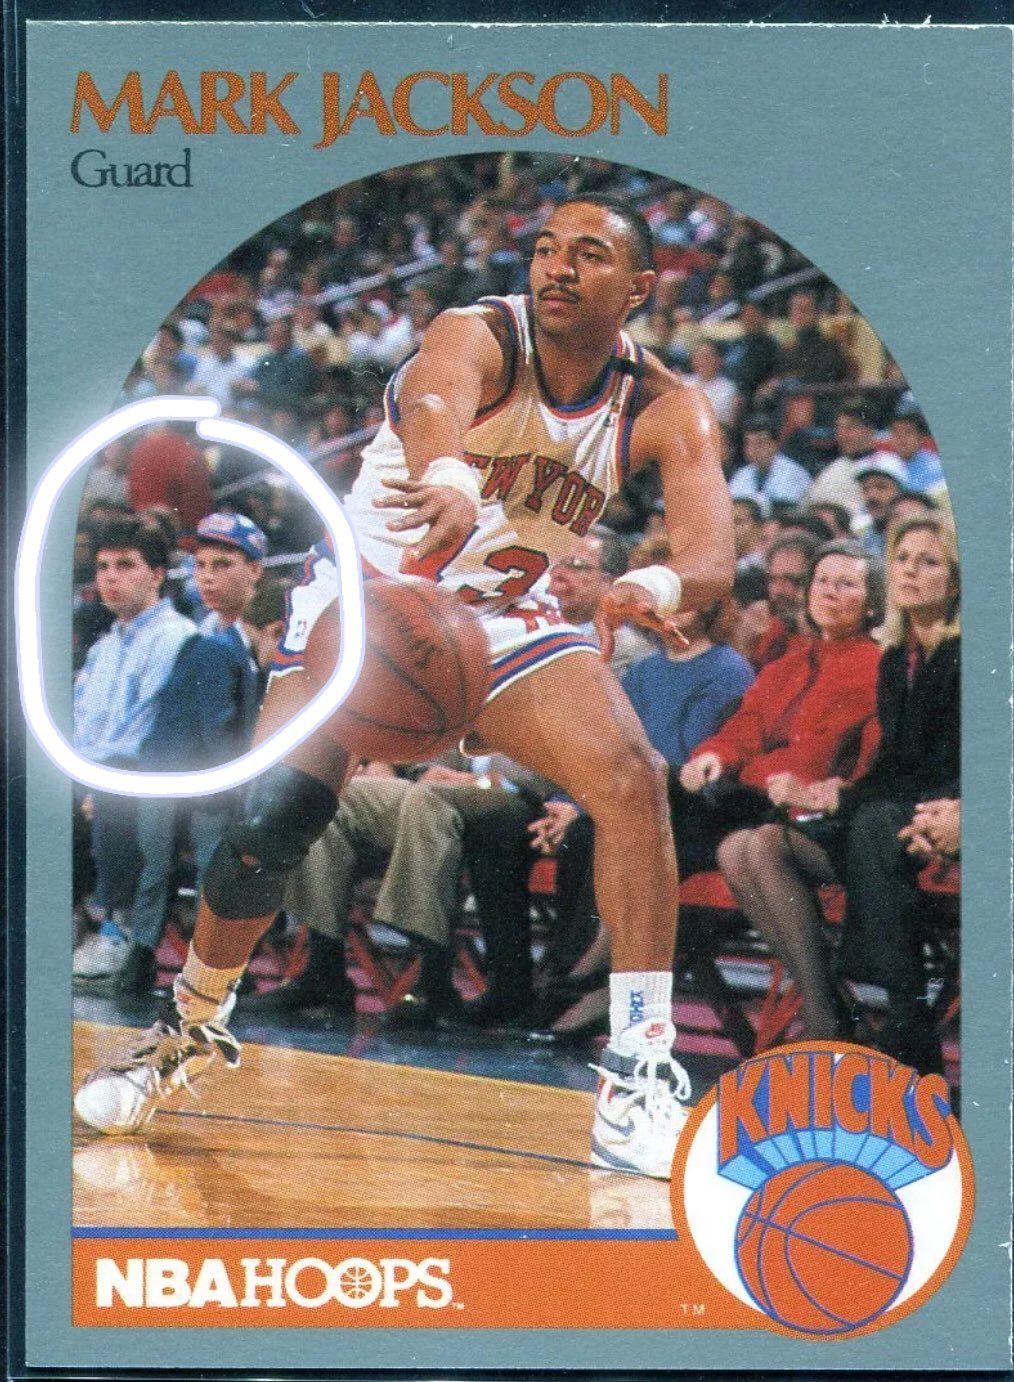 Mark Jackson 1990-91 Hoops card #205 with Melendez Brothers in the